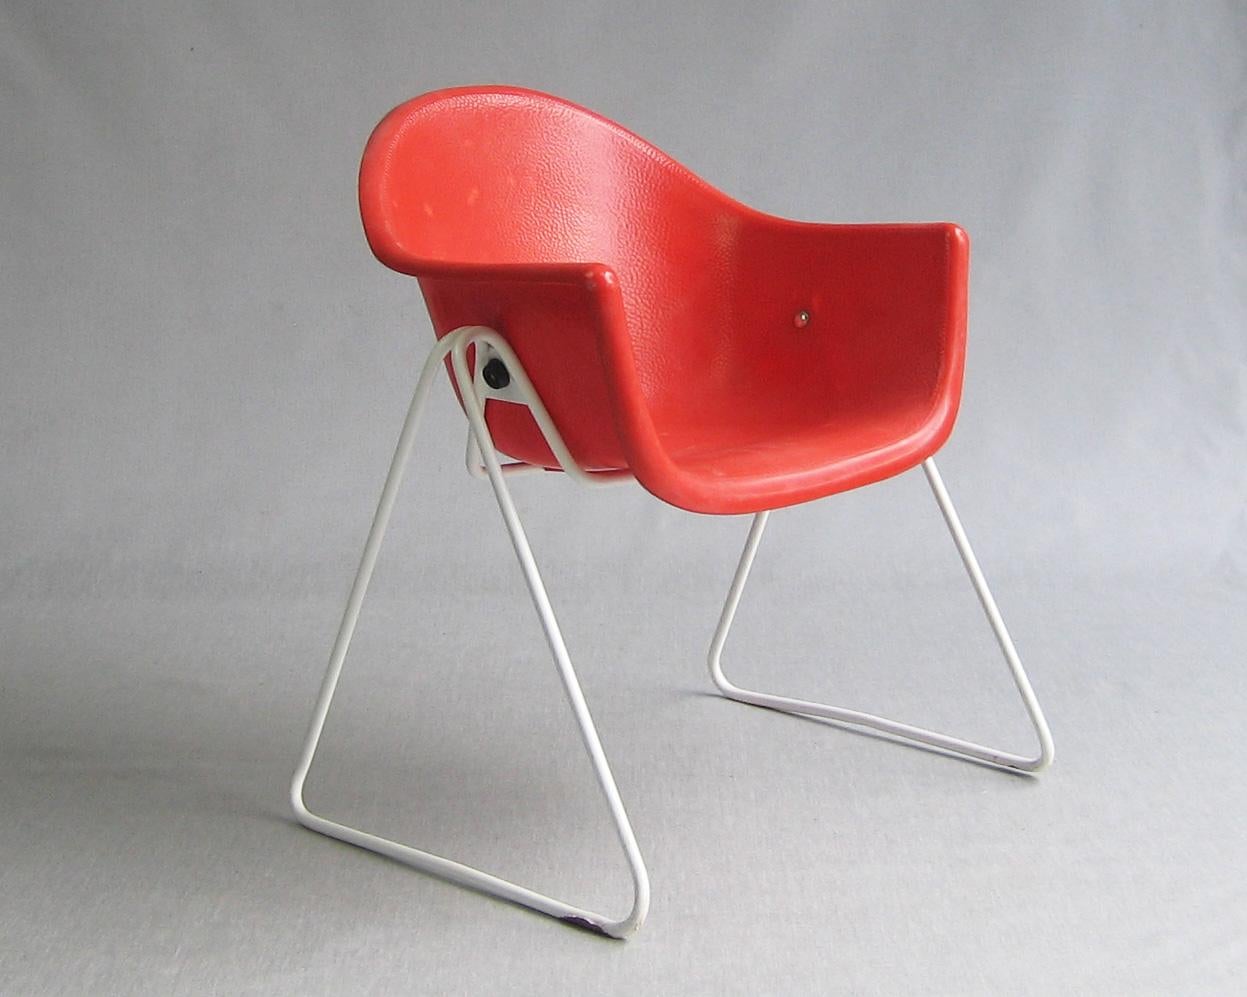 Pair of Walter Papst kids chairs, Wilkhahn, Germany 1961 - 1968 For Sale 11